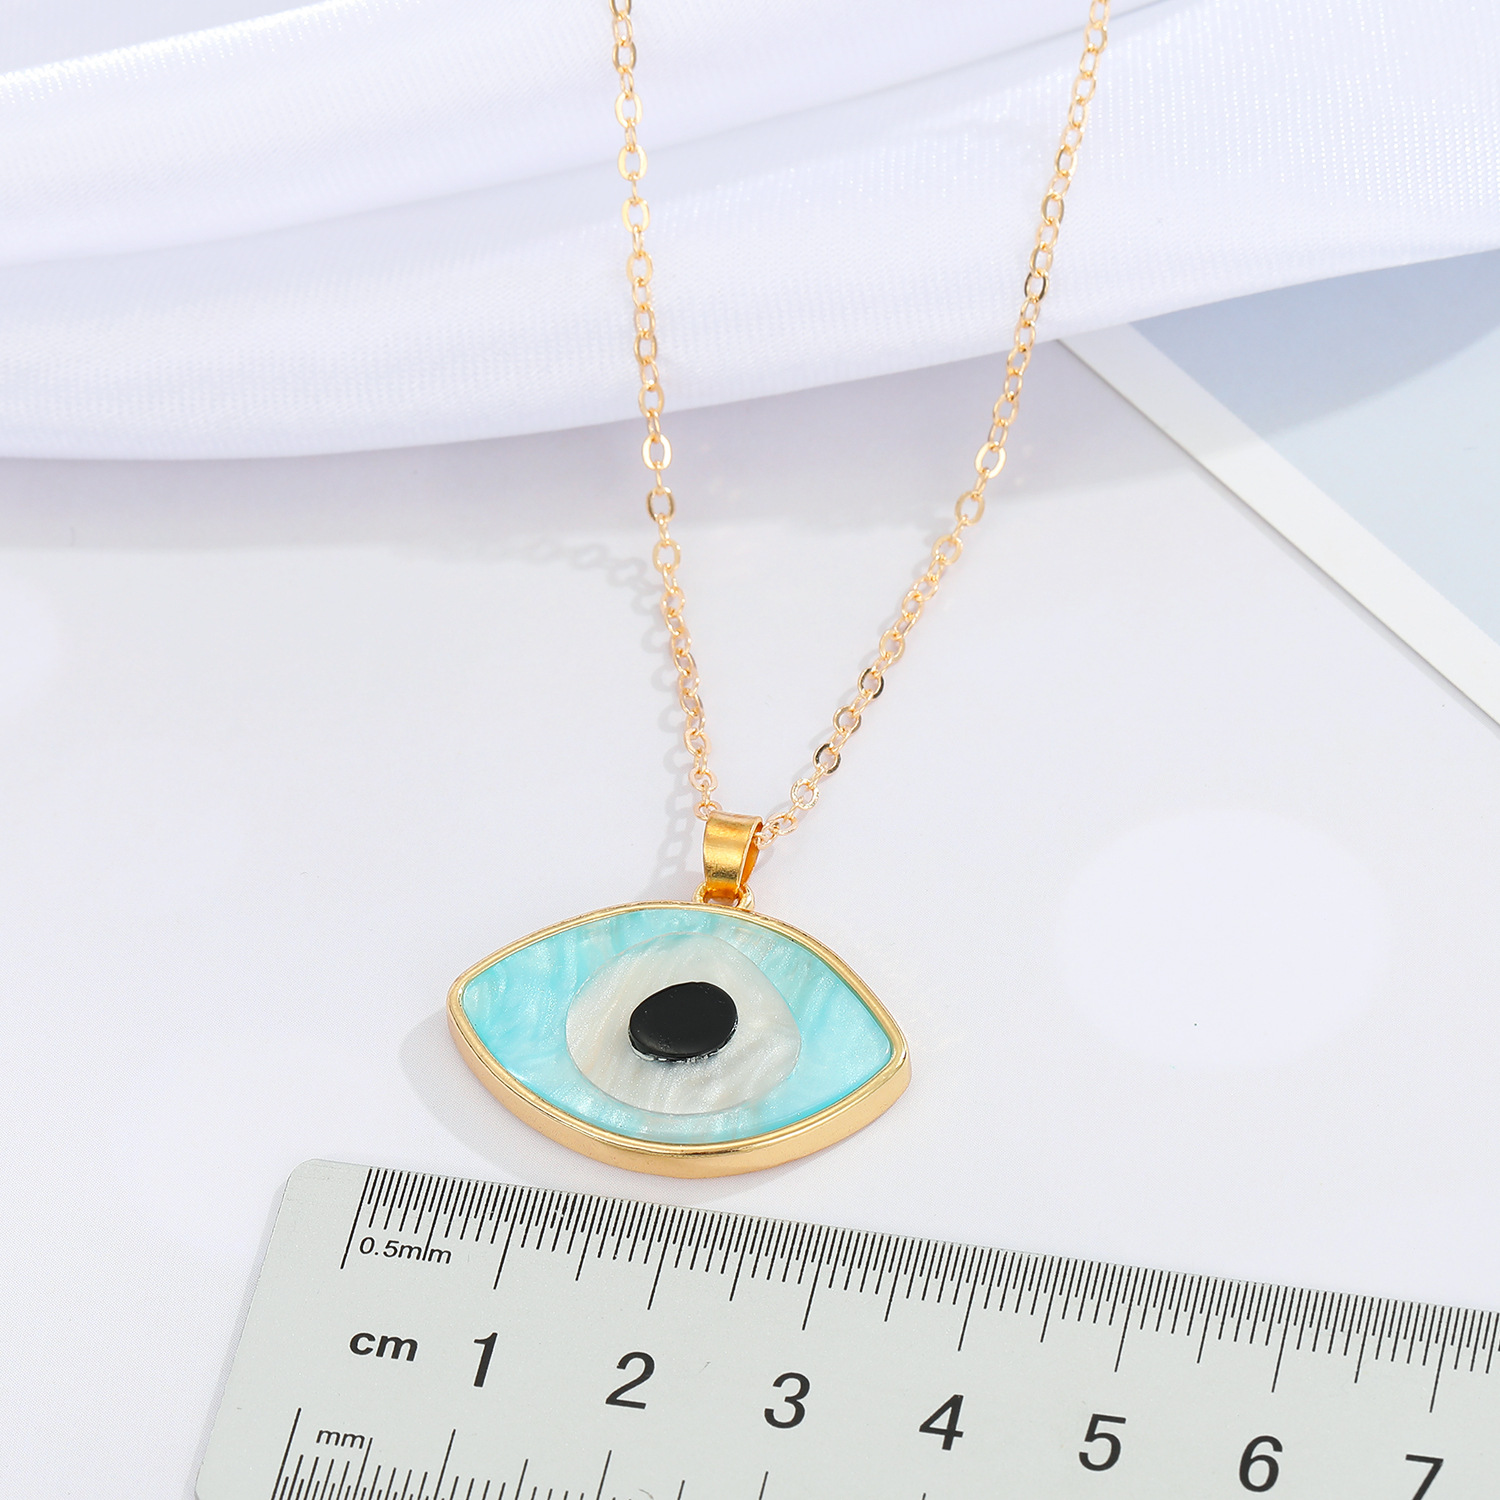 Nihaojewelry creative devil eye clavicle chain necklace Wholesale jewelrypicture3